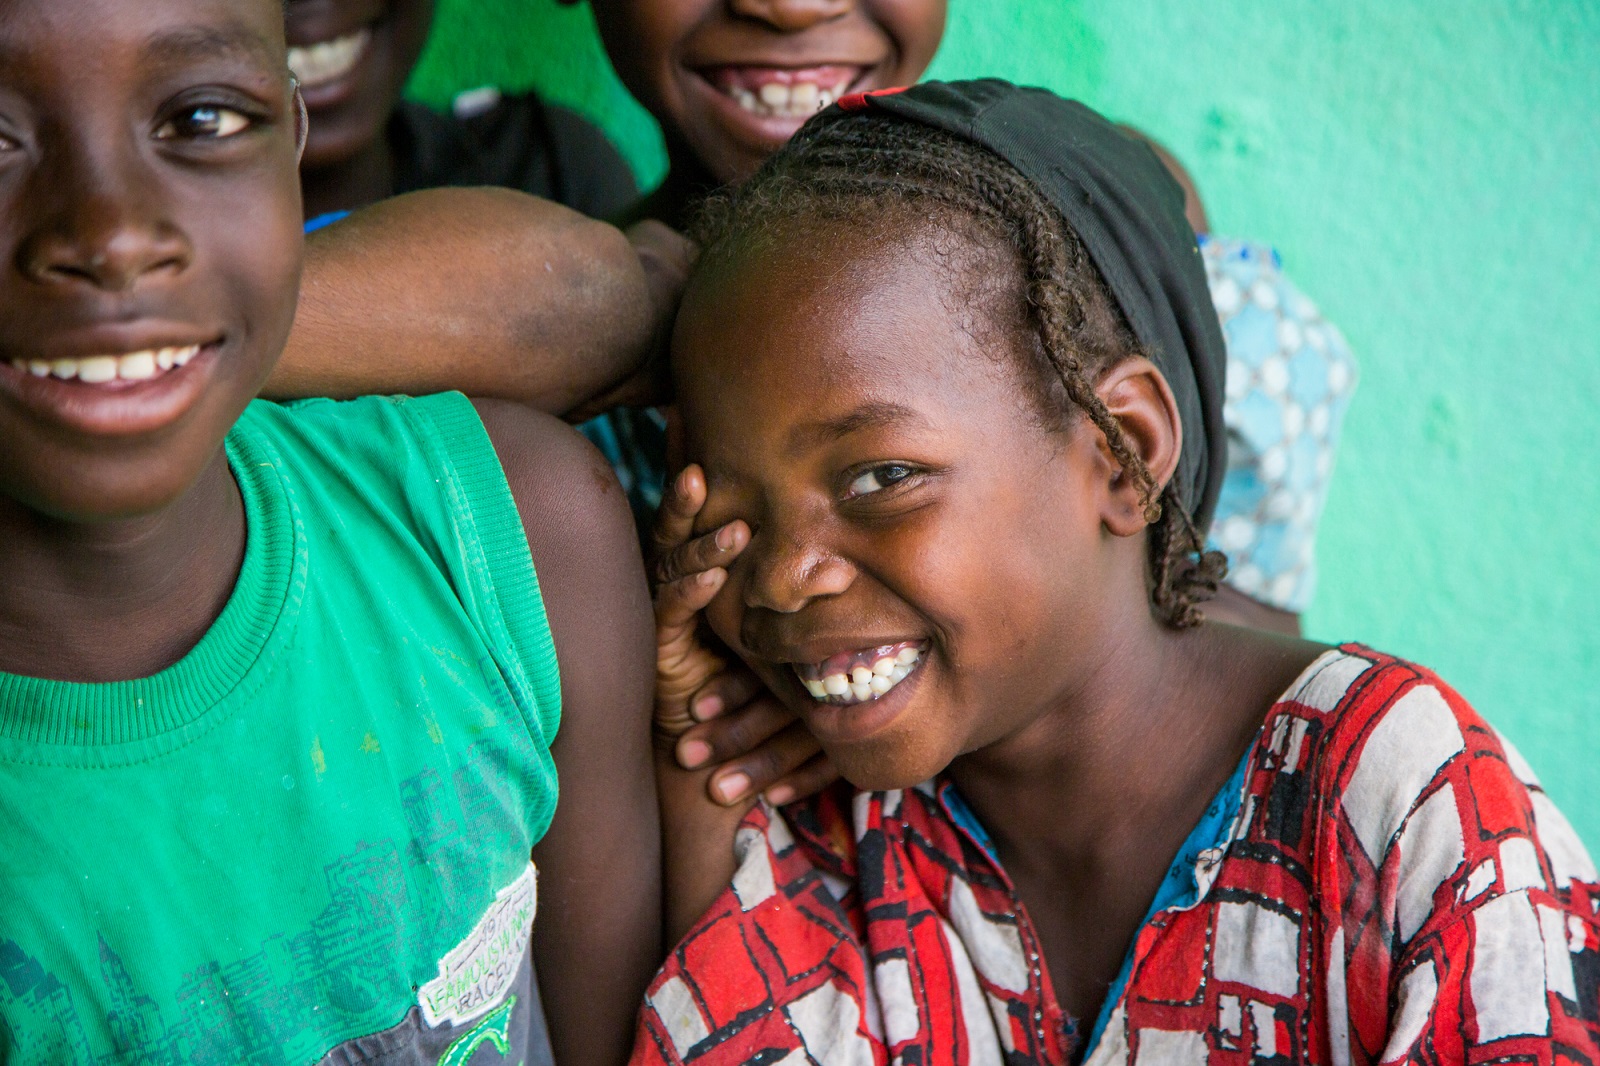 Children share a laugh during a door to door vaccine campaign in the Zaikai district in Maroua, Cameroon.